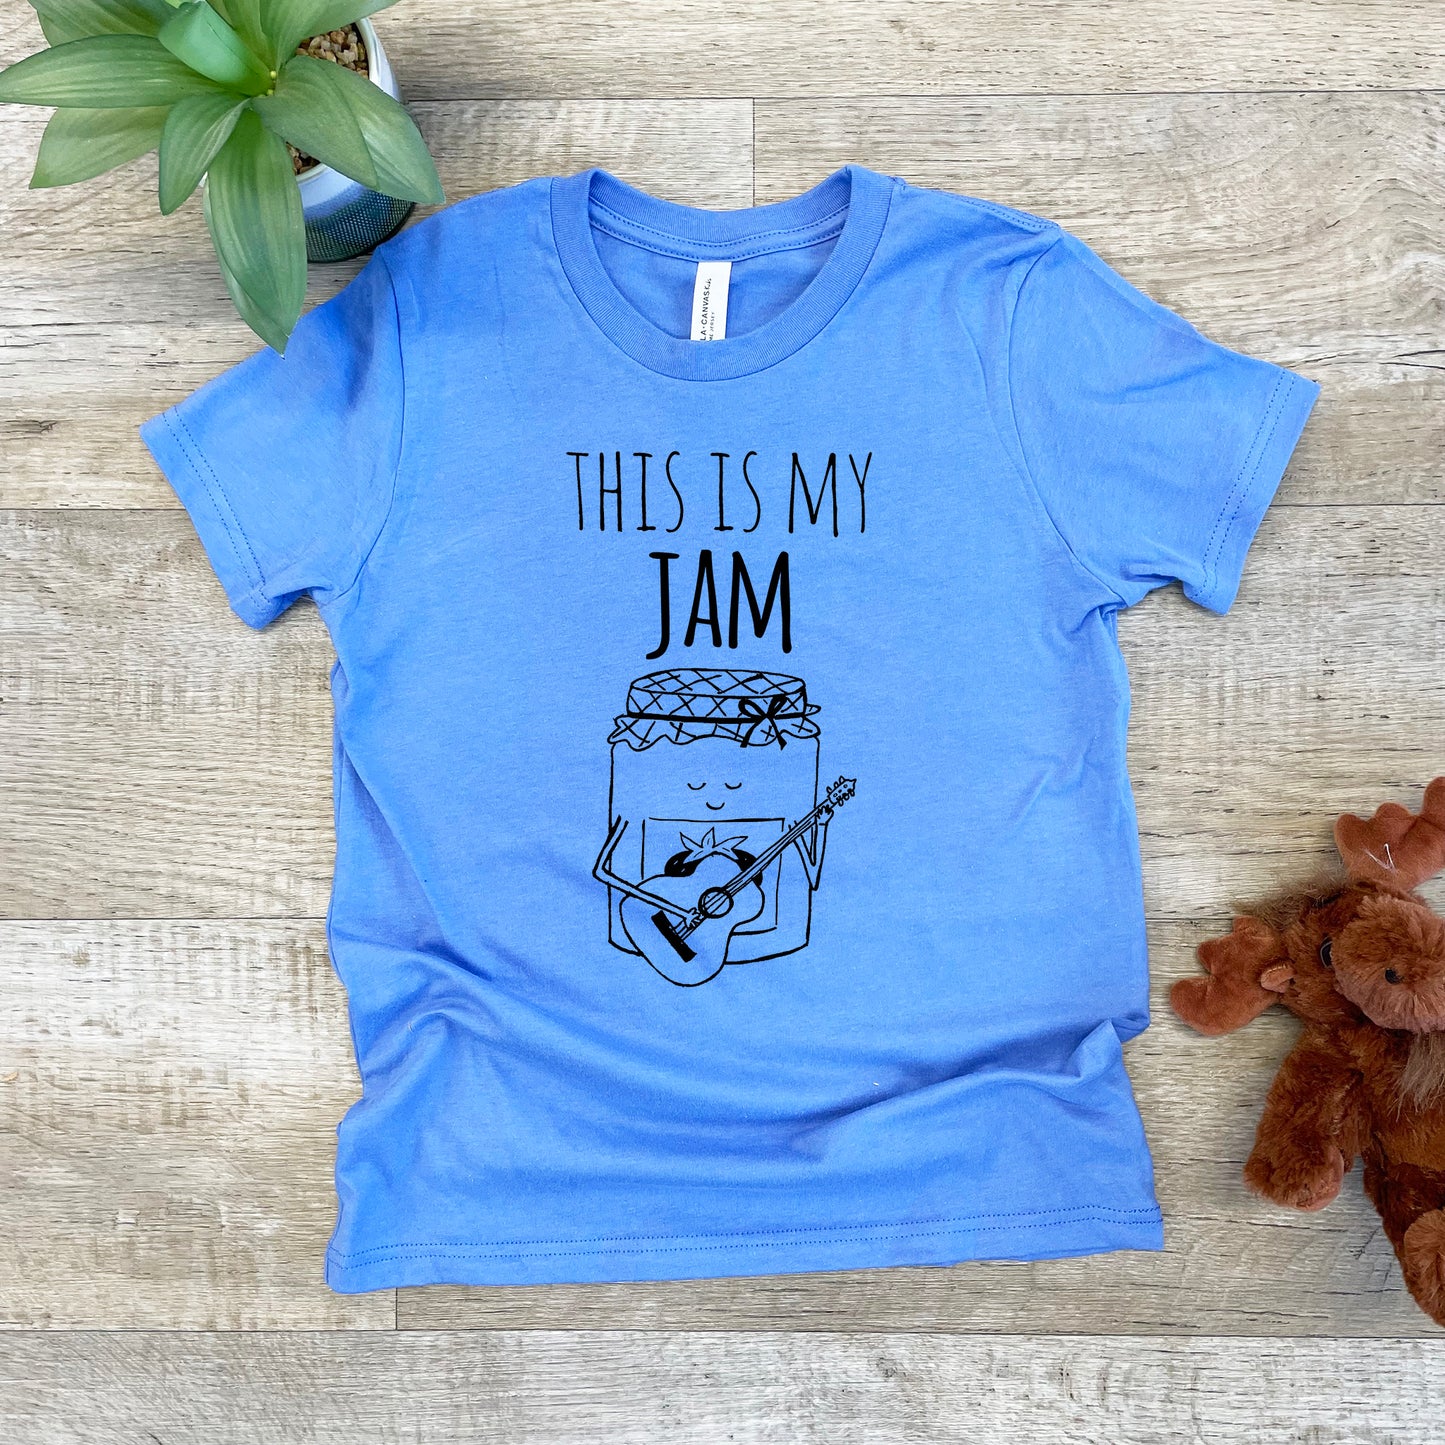 This Is My Jam - Kid's Tee - Columbia Blue or Lavender